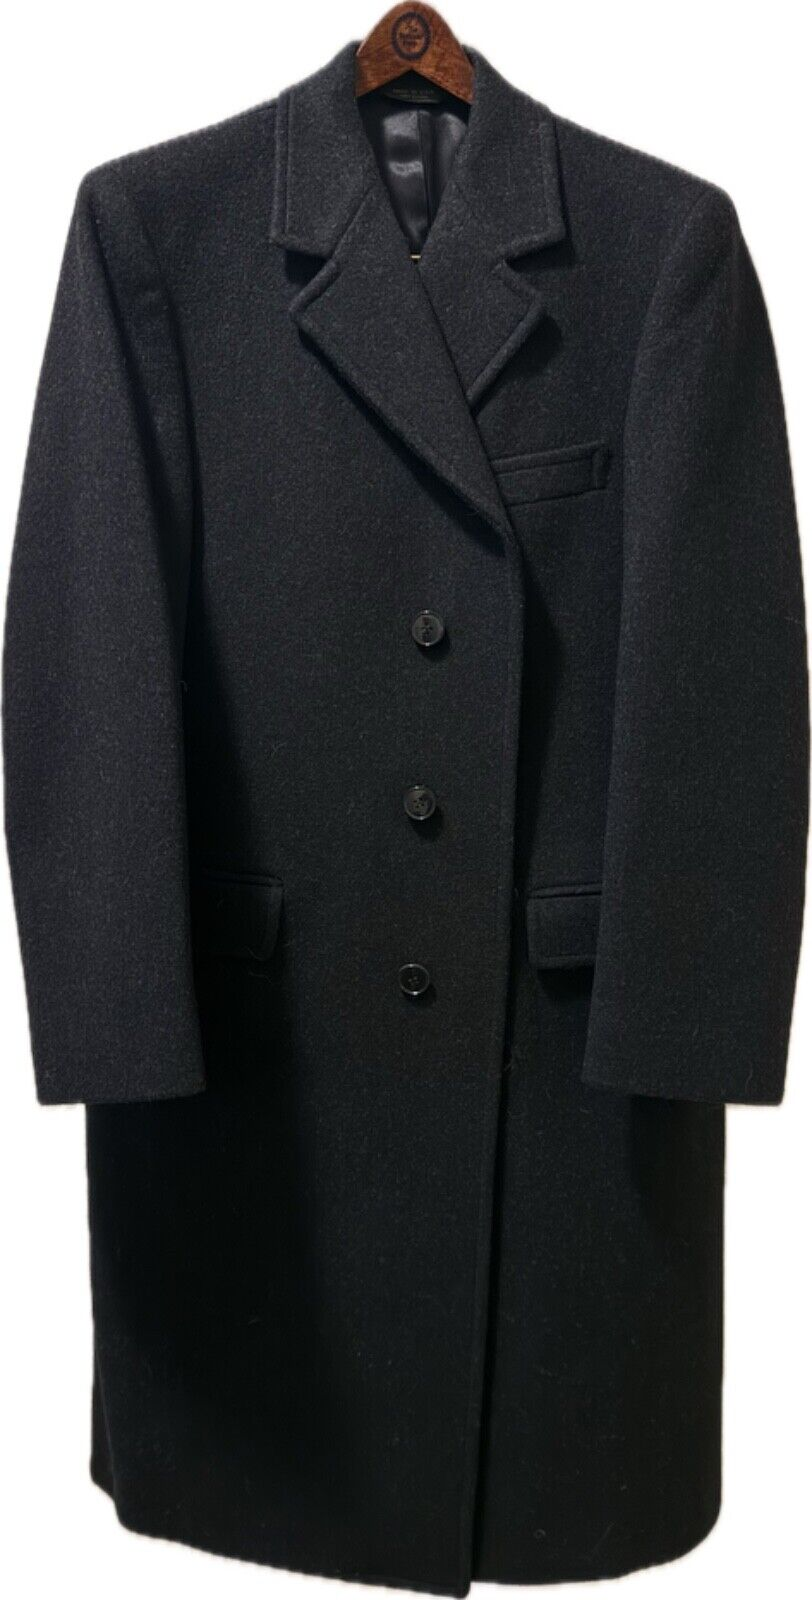 "The Andover Shop Charcoal Wool Chesterfield Overcoat" Sz 40 (NWOT)